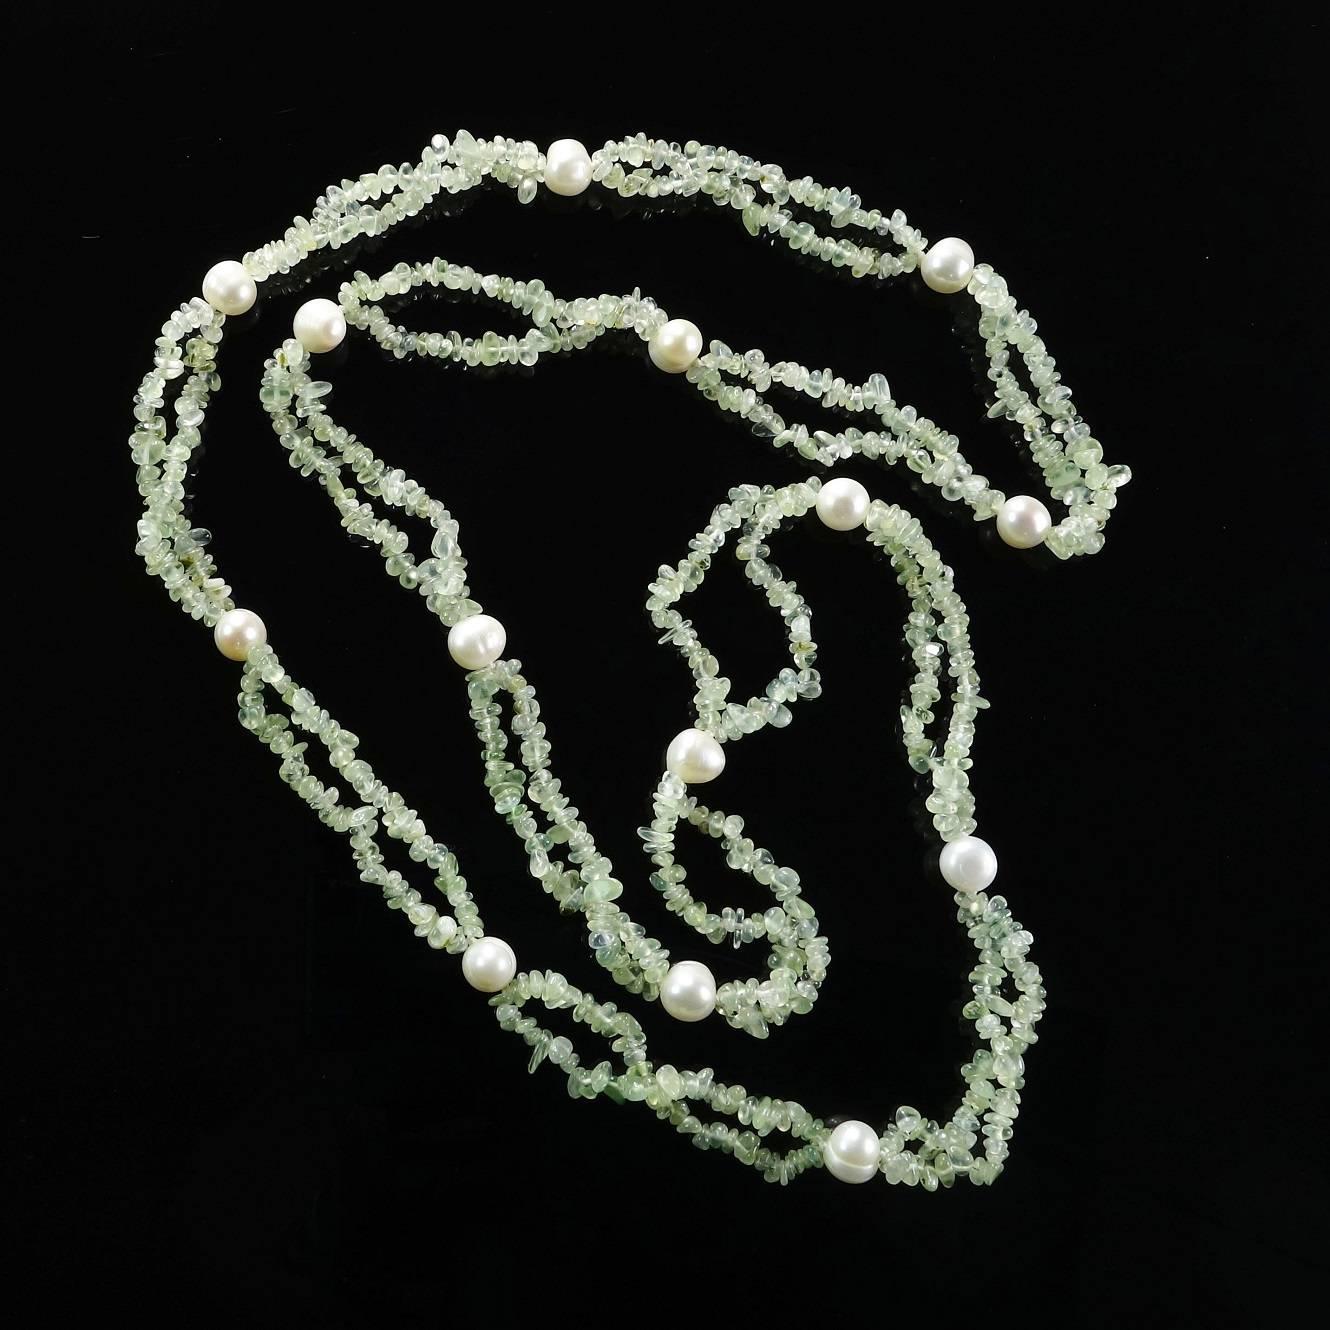 Women's AJD Brazilian Prehnite Polished Chips and Freshwater Pearl Necklace